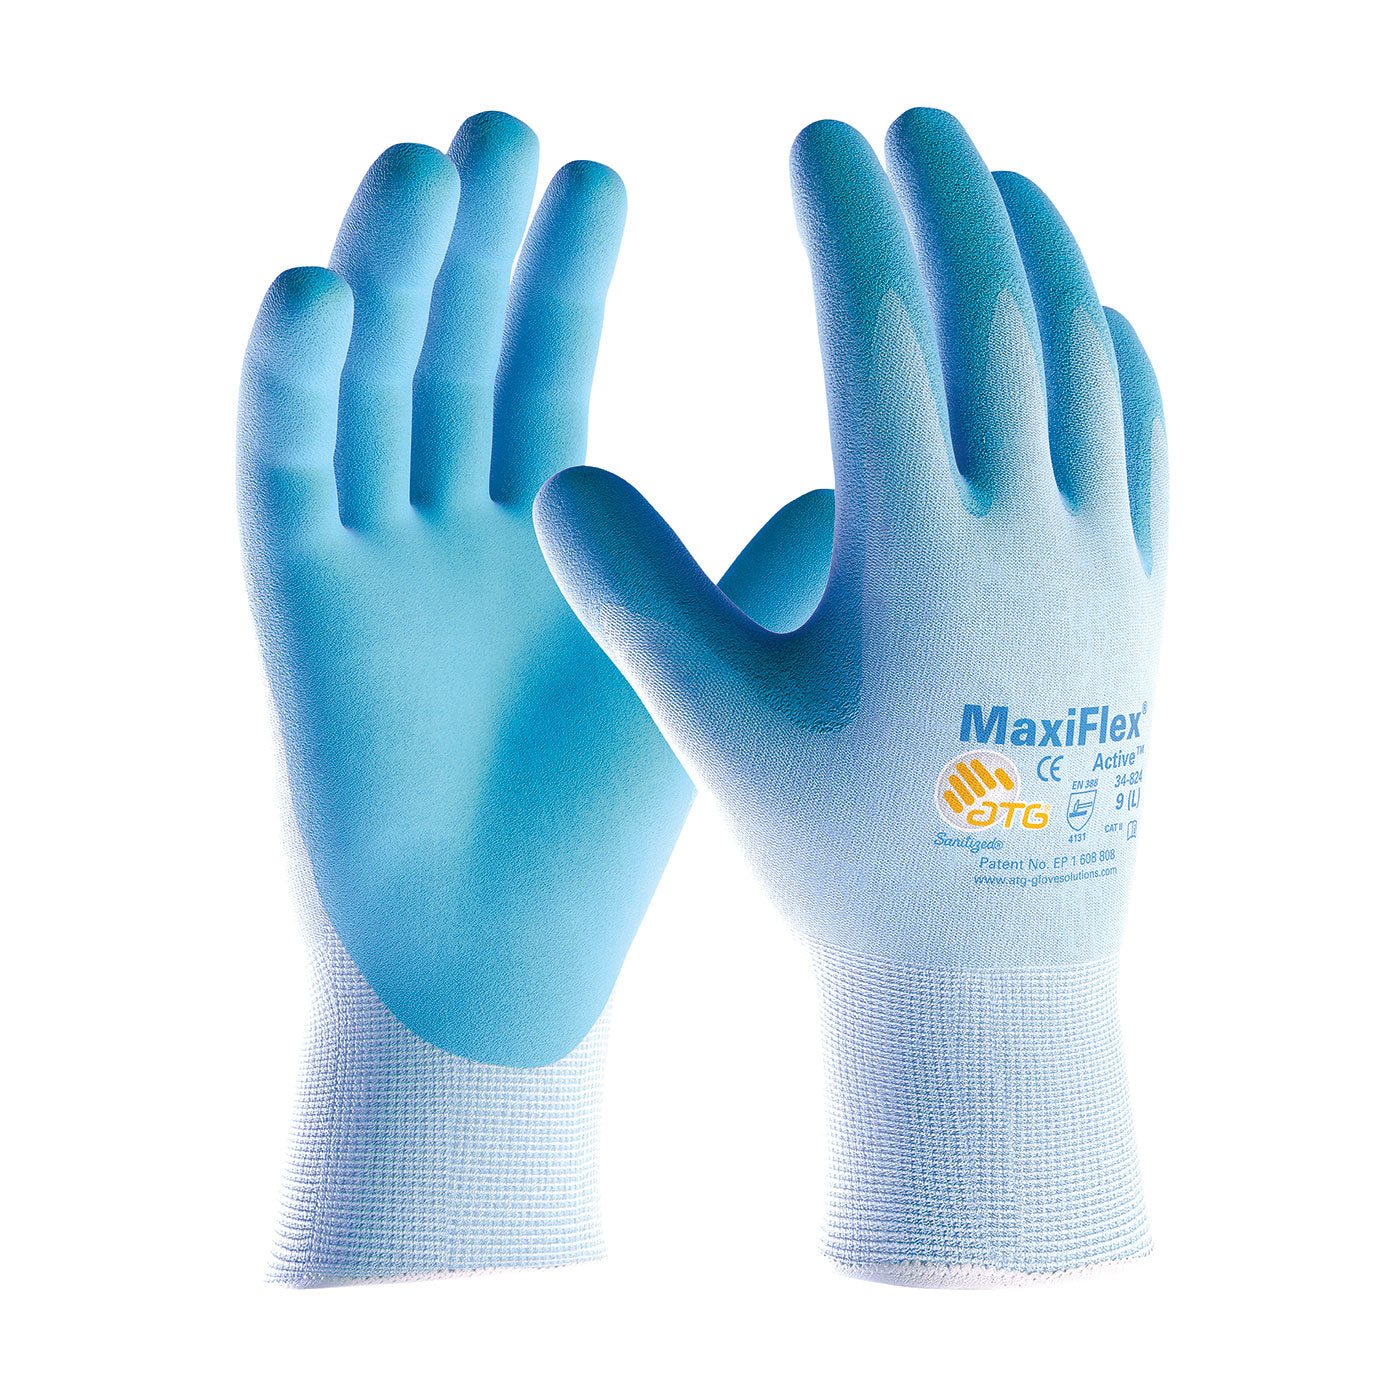 PIP 34-824 MaxiFlex Active Seamless Knit Nylon/Lycra Gloves - Ultra Lightweight Nitrile Coated Micro-Foam Grip (12 Pairs)-eSafety Supplies, Inc